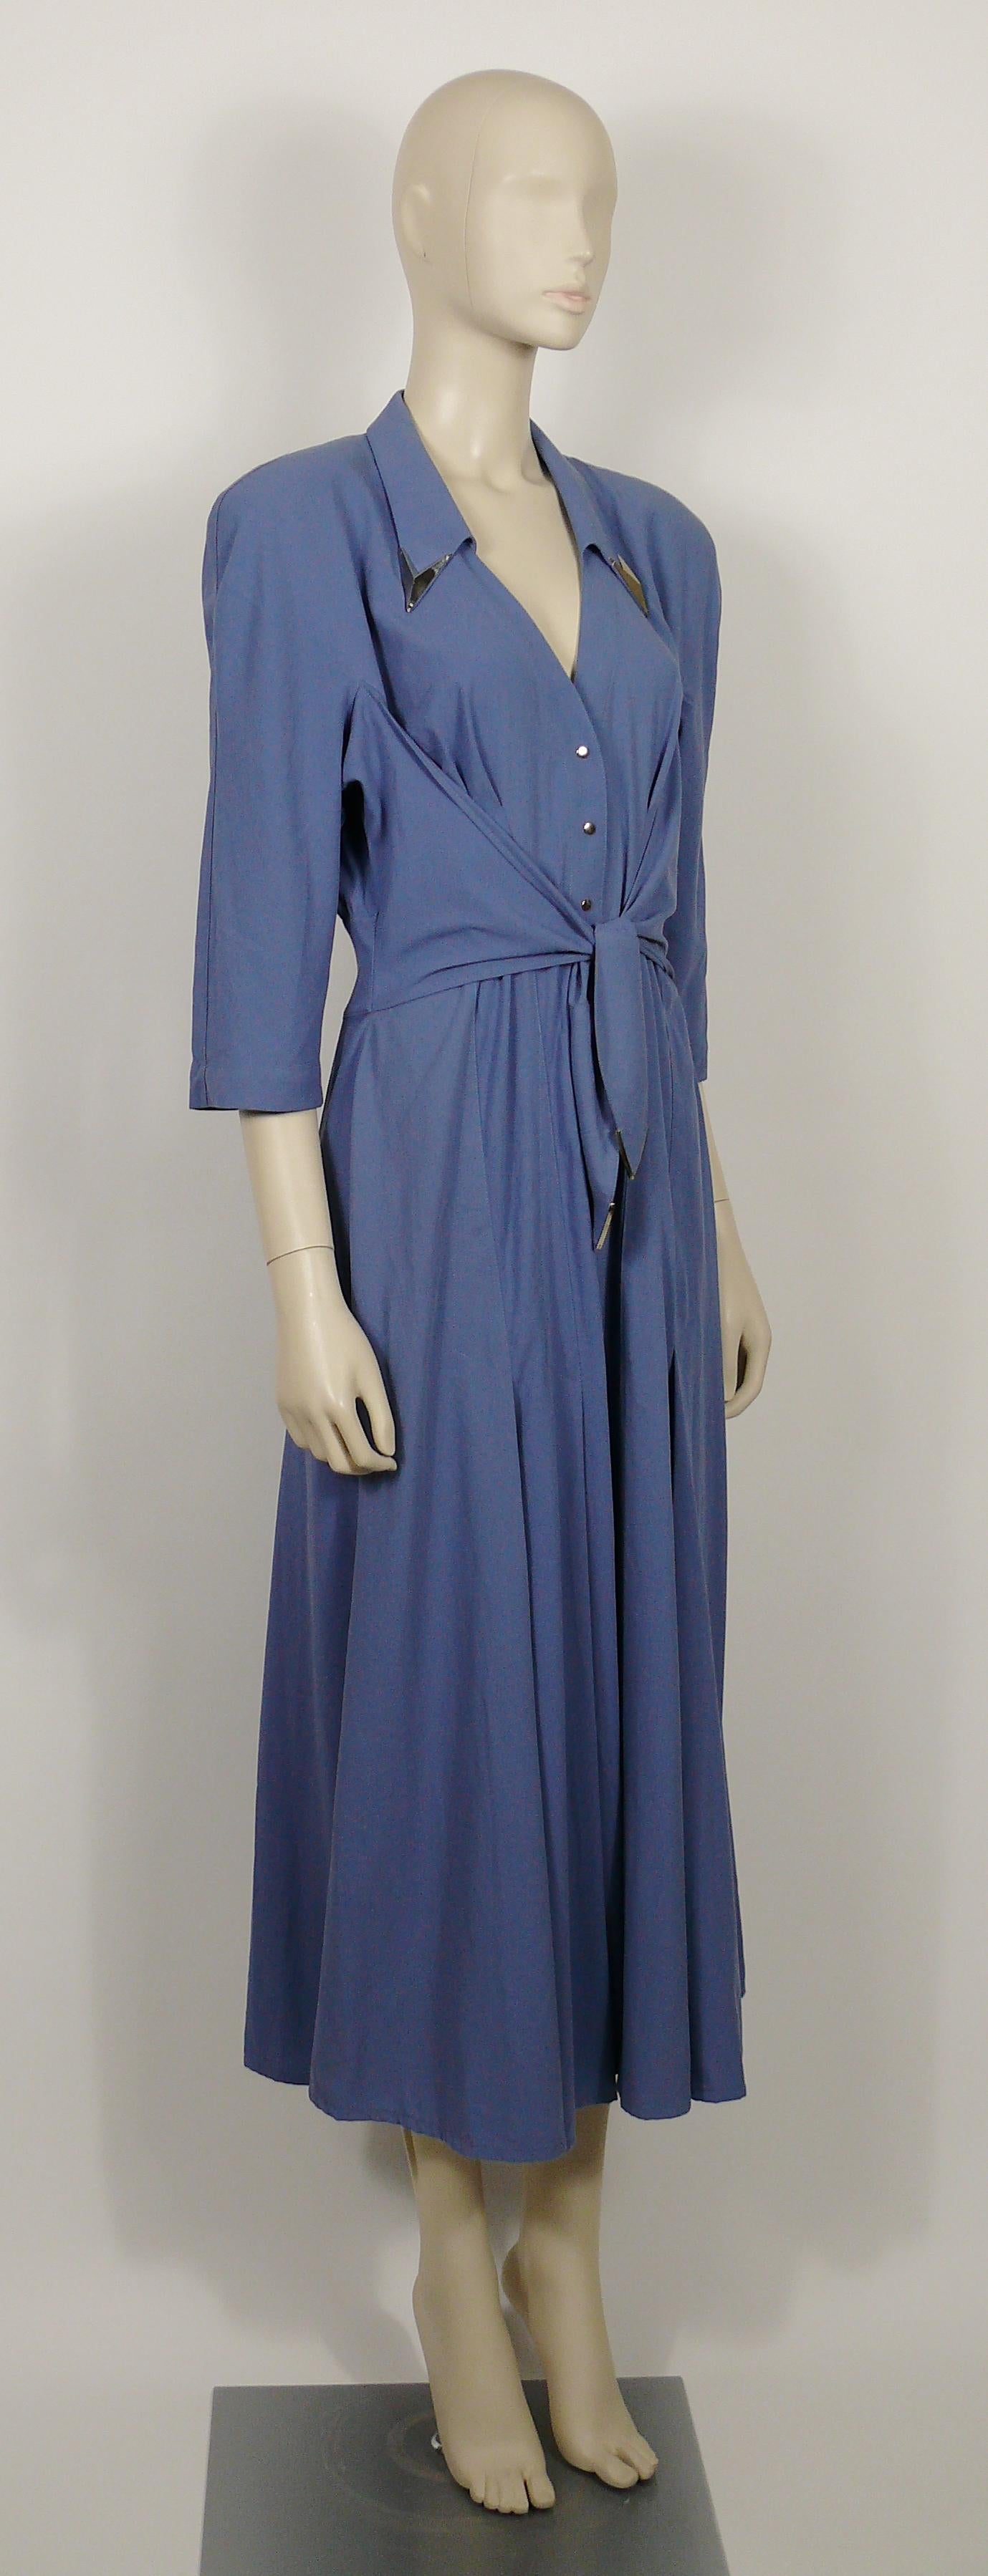 THIERRY MUGLER vintage blue maxi flowing dress featuring silver toned metal pointed appliques at the collar and belt.

Button-down snap closure.
Mid length sleeves.
Integrated belt.
Shoulder pads.
Unlined.

Label reads THIERRY MUGLER Paris
Made in